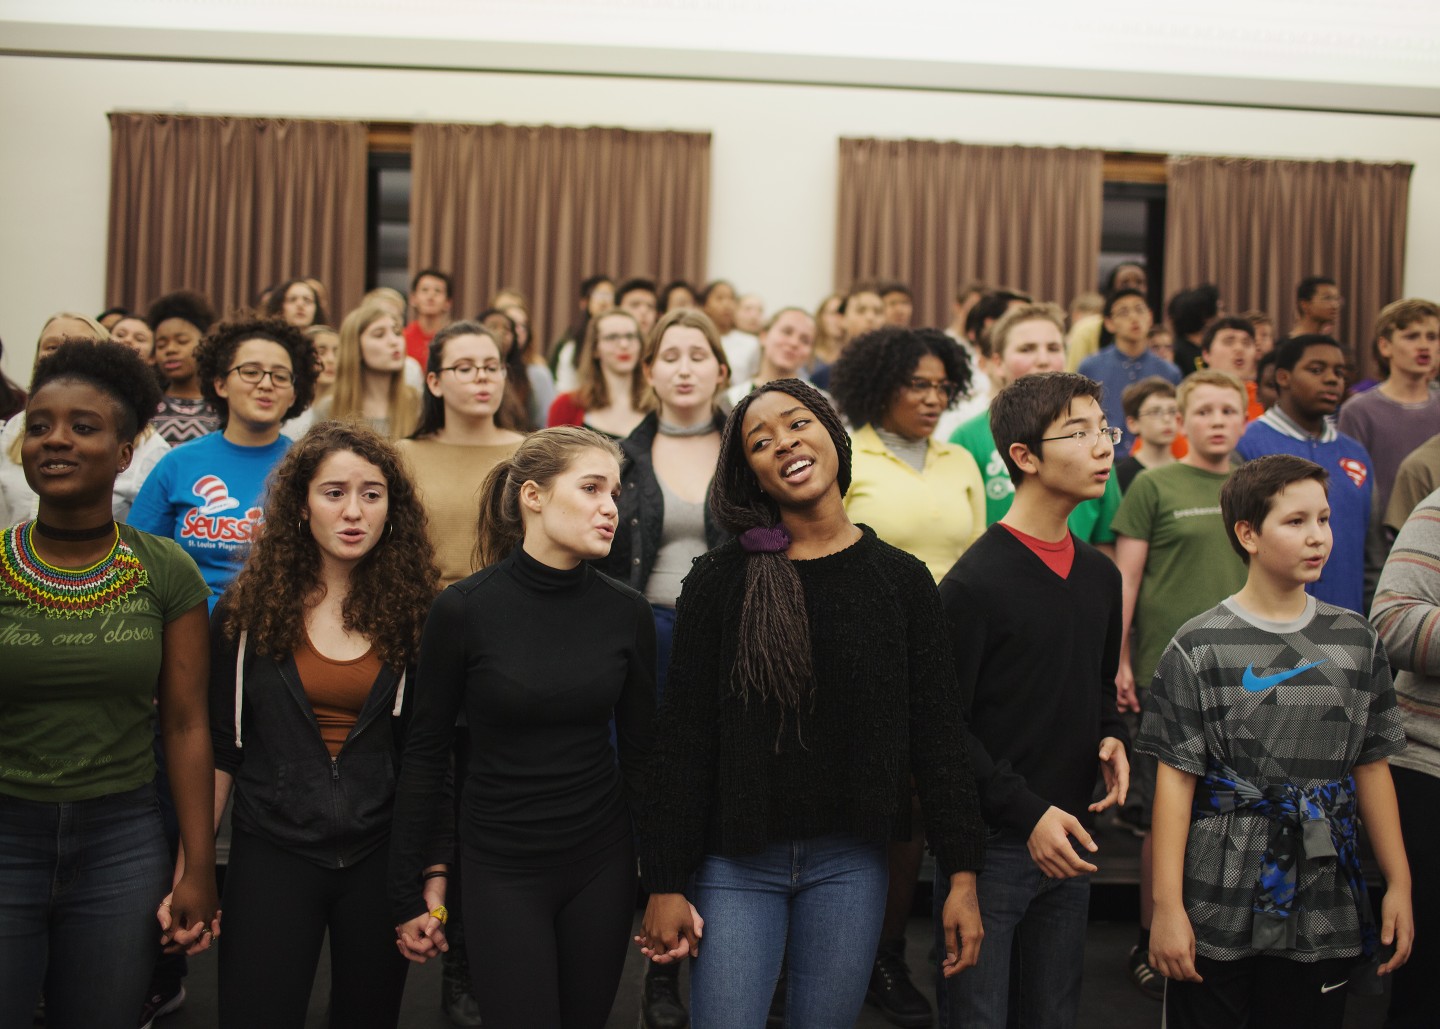 Chicago Children’s Choir Doesn’t Just Teach Kids To Sing In Harmony. It’s Also Creating Global Citizens.